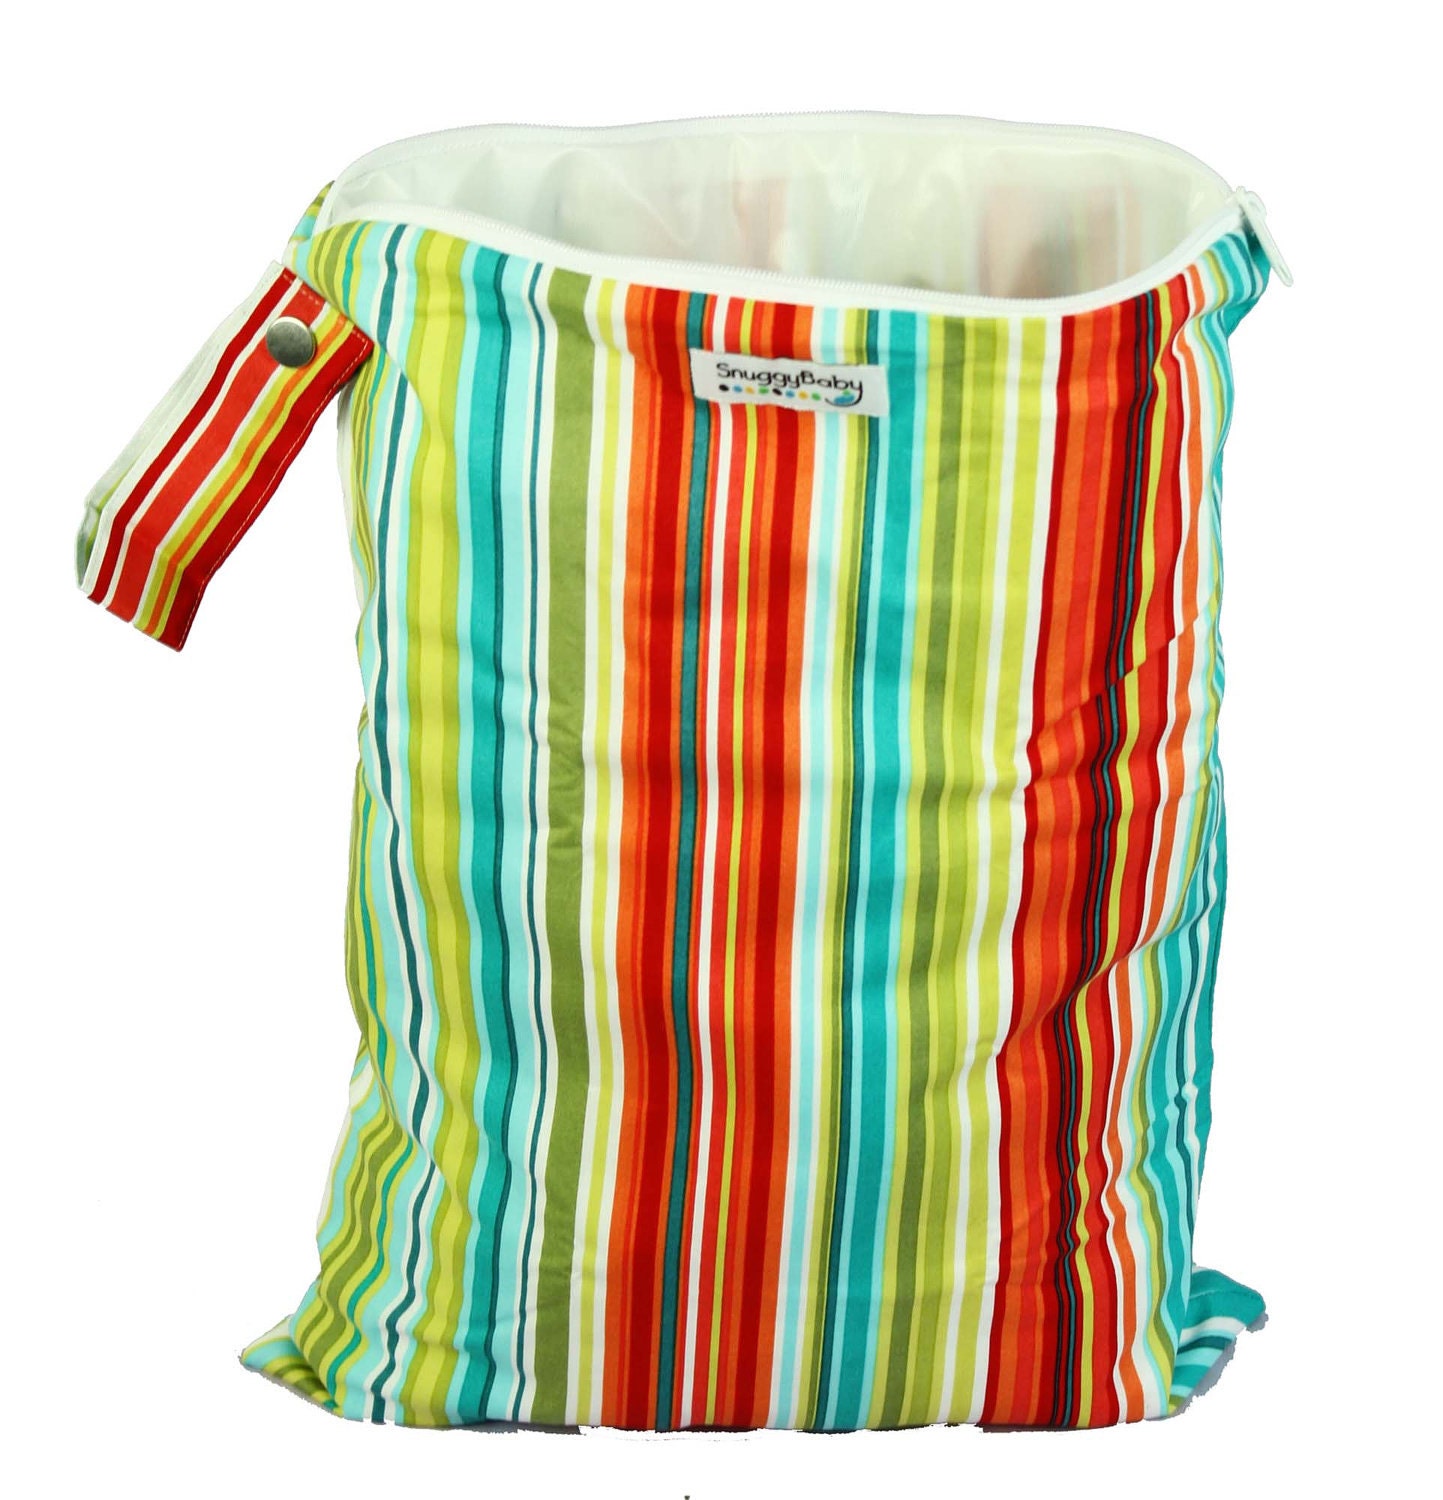 LARGE Wet Bag with Zipper and Waterproof Lining - Caribbean Stripe - FAST SHIPPING